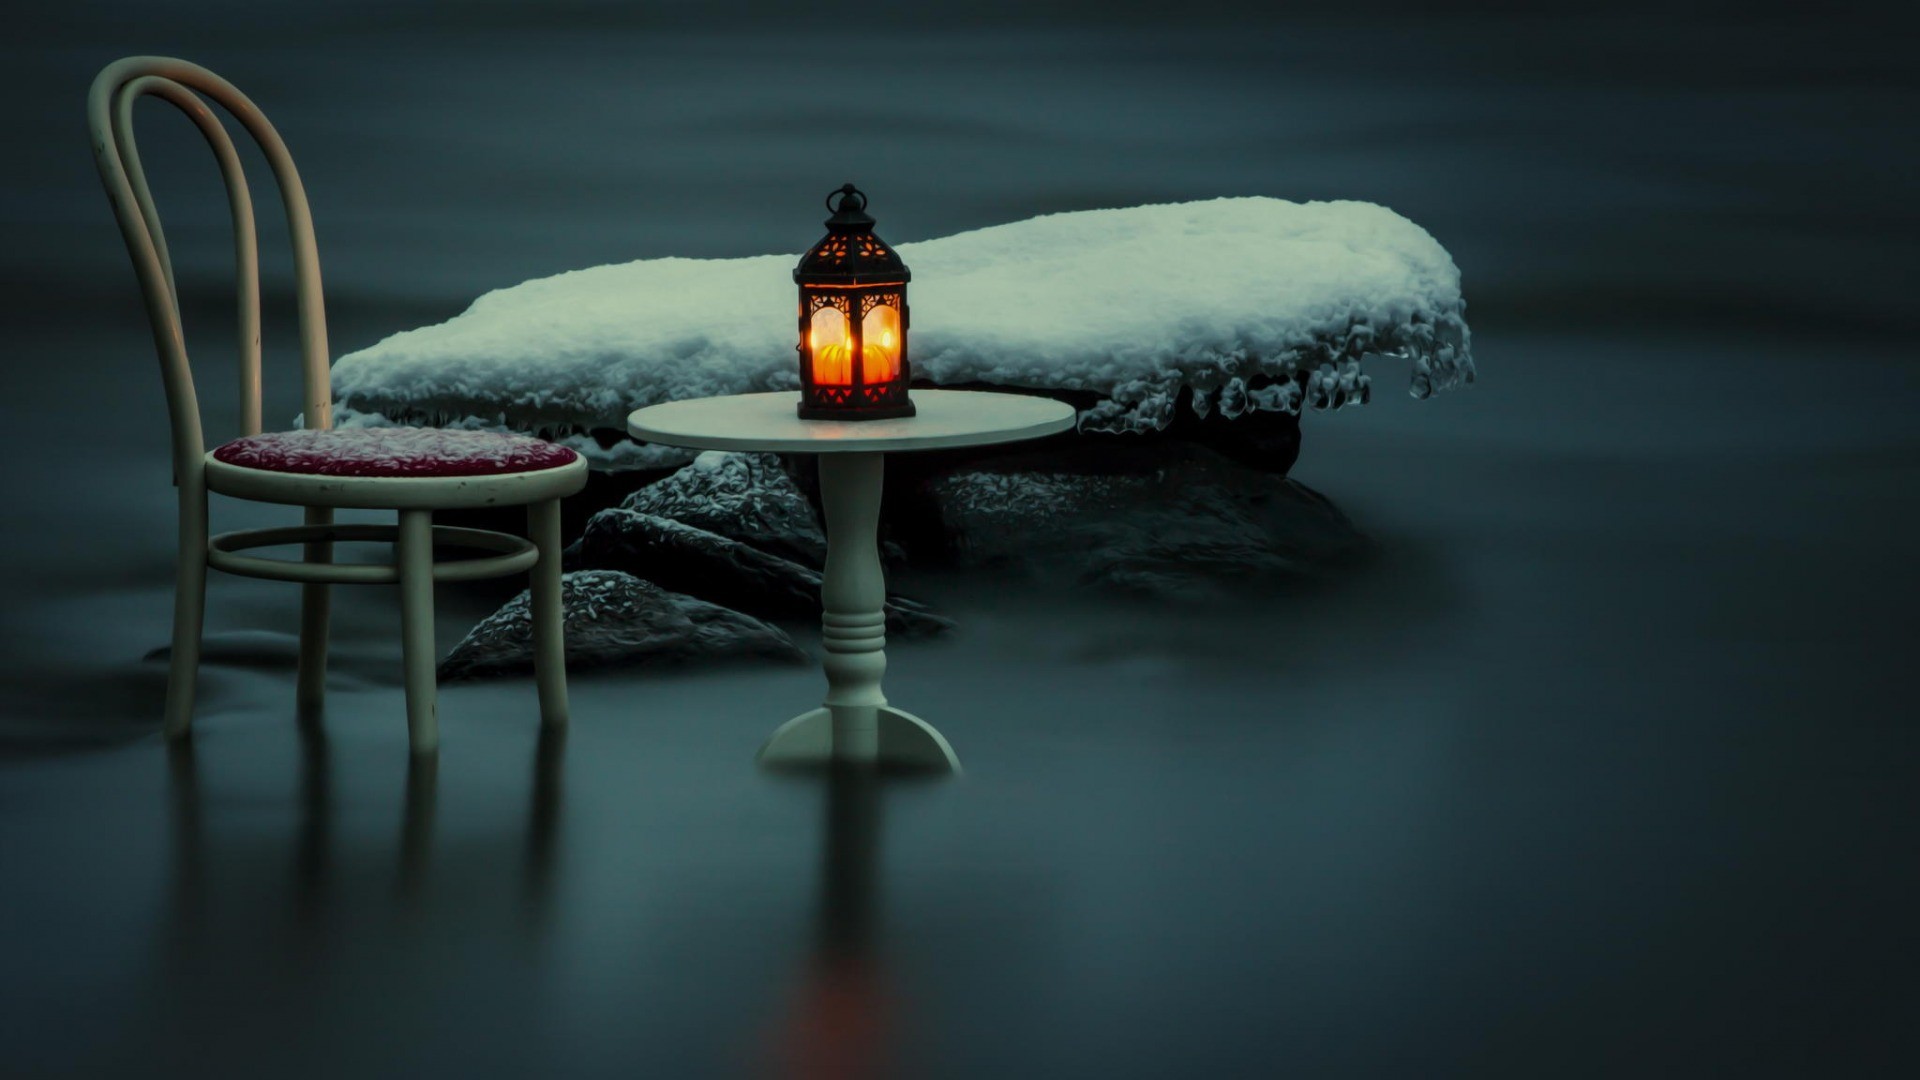 Photography Artwork Nature Water Snow Winter Rock Stones Table Chair Ice Icicle Lantern Lamp Blurred 1920x1080